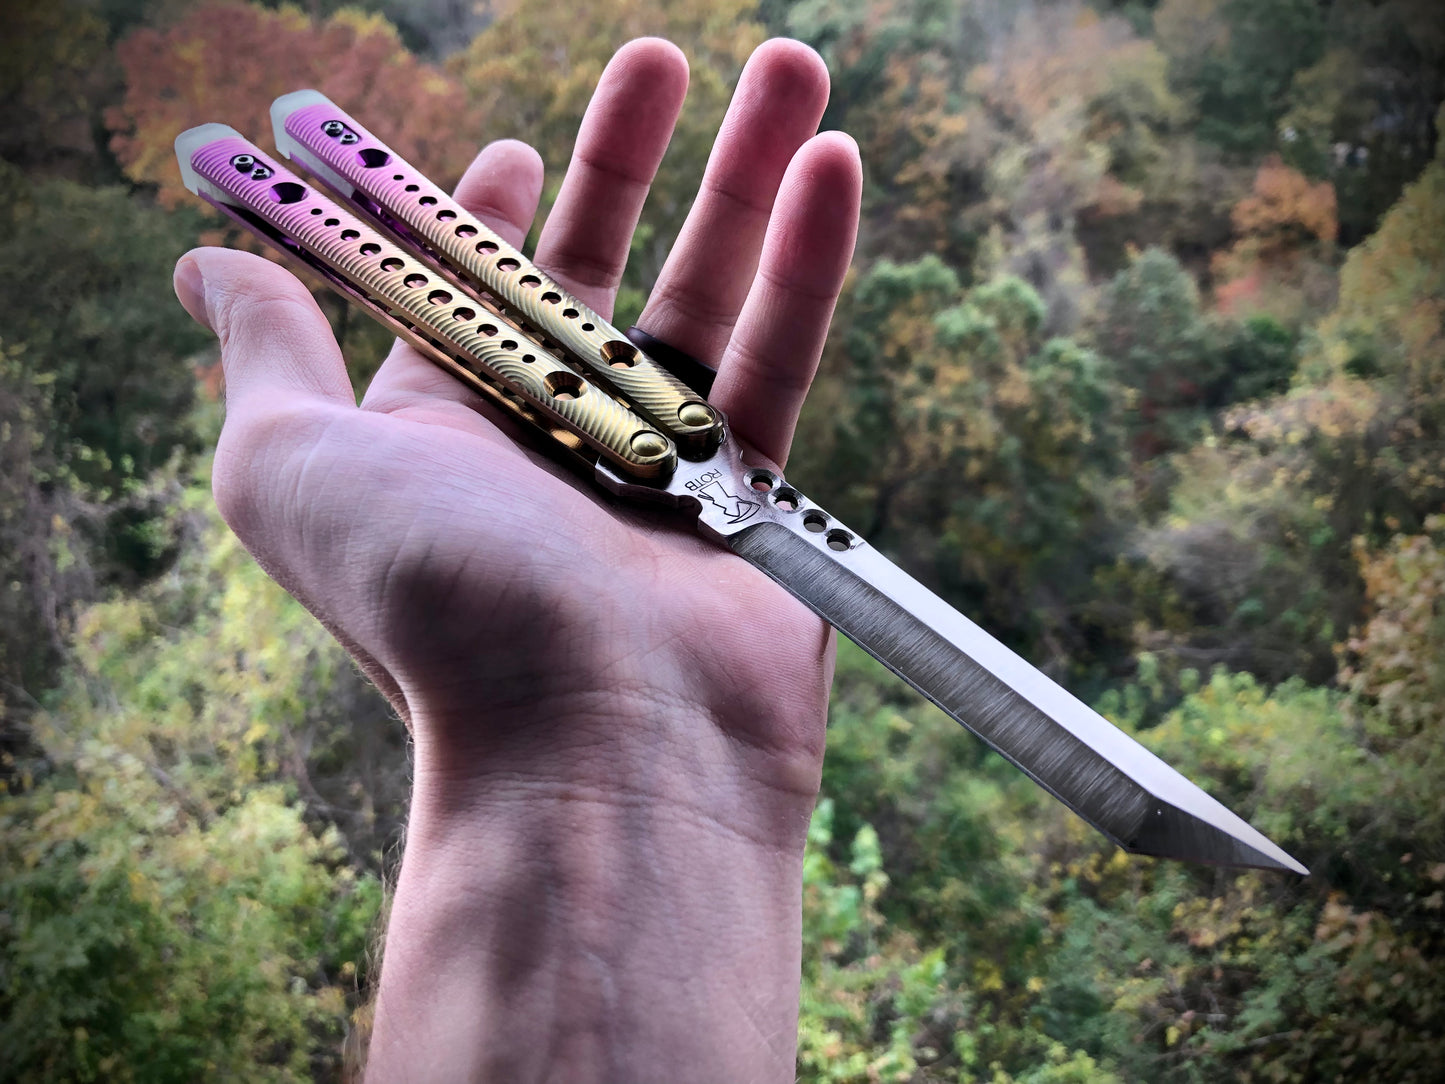 Improve the balance of your Blade Runner Systems Replicant, BRS Alpha Beast, and BRS Barebones with Zippy Spacers. Adjustable balance, positive jimping, and handle extensions to protect your favorite balisongs from concrete drops. Featuring Revenge of the Blades (ROTB) and Squiggle Scales.